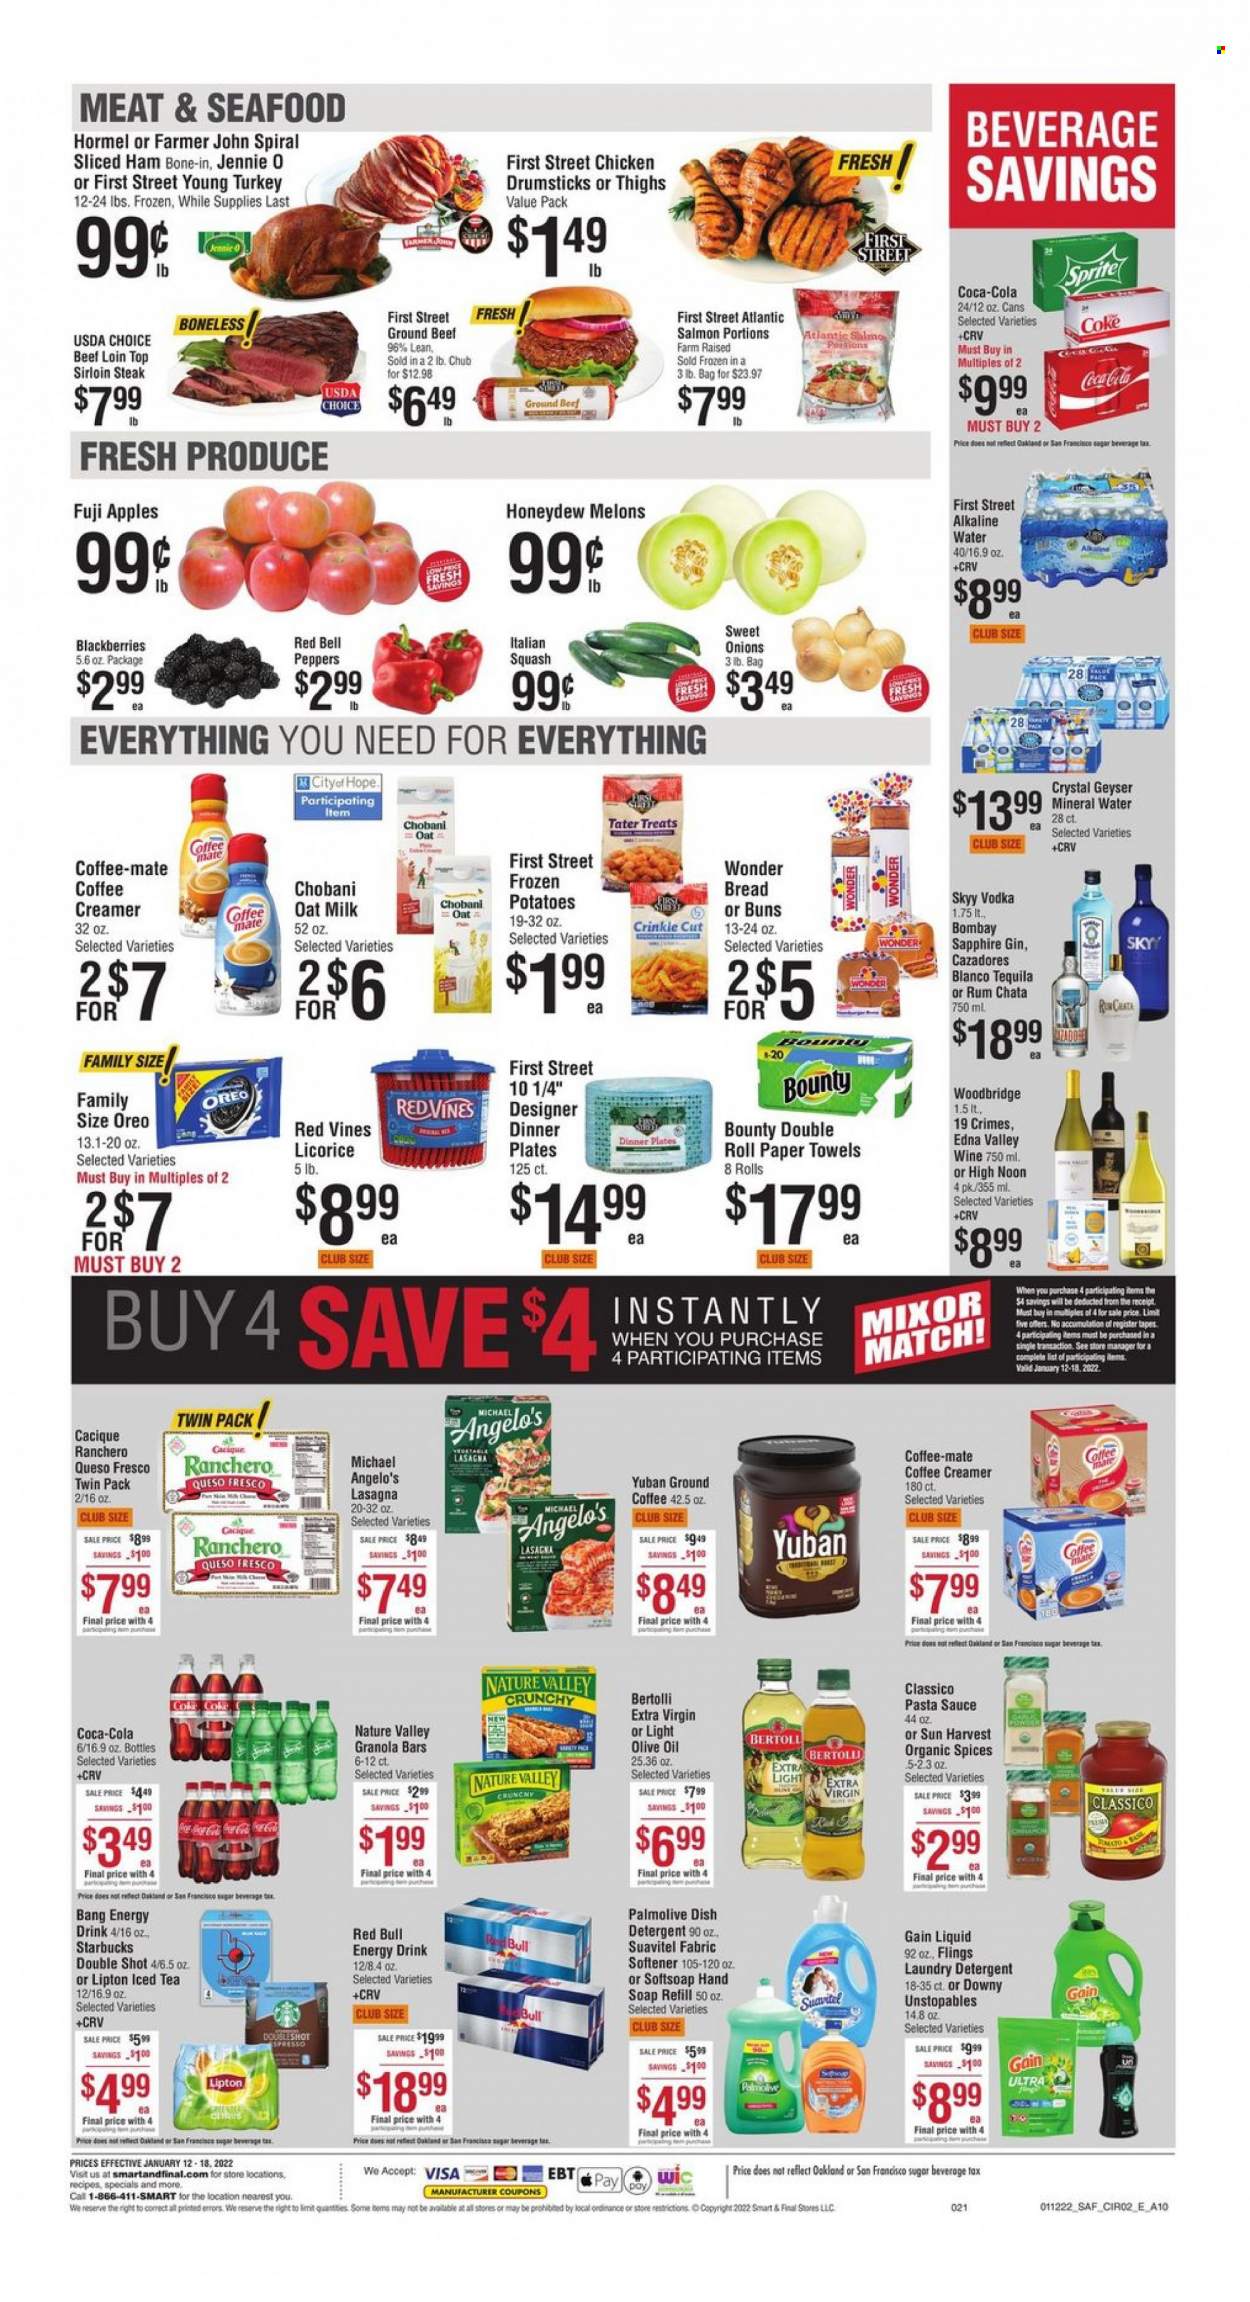 thumbnail - Smart & Final Flyer - 01/12/2022 - 01/18/2022 - Sales products - bread, buns, potatoes, peppers, apples, honeydew, Fuji apple, salmon, seafood, pasta sauce, sauce, lasagna meal, Bertolli, Hormel, ham, queso fresco, Oreo, Chobani, Coffee-Mate, milk, oat milk, creamer, Bounty, sugar, granola bar, Nature Valley, Classico, extra virgin olive oil, olive oil, oil, Coca-Cola, energy drink, Lipton, ice tea, Red Bull, mineral water, alkaline water, Starbucks, ground coffee, L'Or, Woodbridge, gin, rum, tequila, vodka, SKYY, chicken drumsticks, beef meat, beef sirloin, ground beef, steak, sirloin steak, kitchen towels, paper towels, Gain, Unstopables, fabric softener, laundry detergent, melons. Page 3.